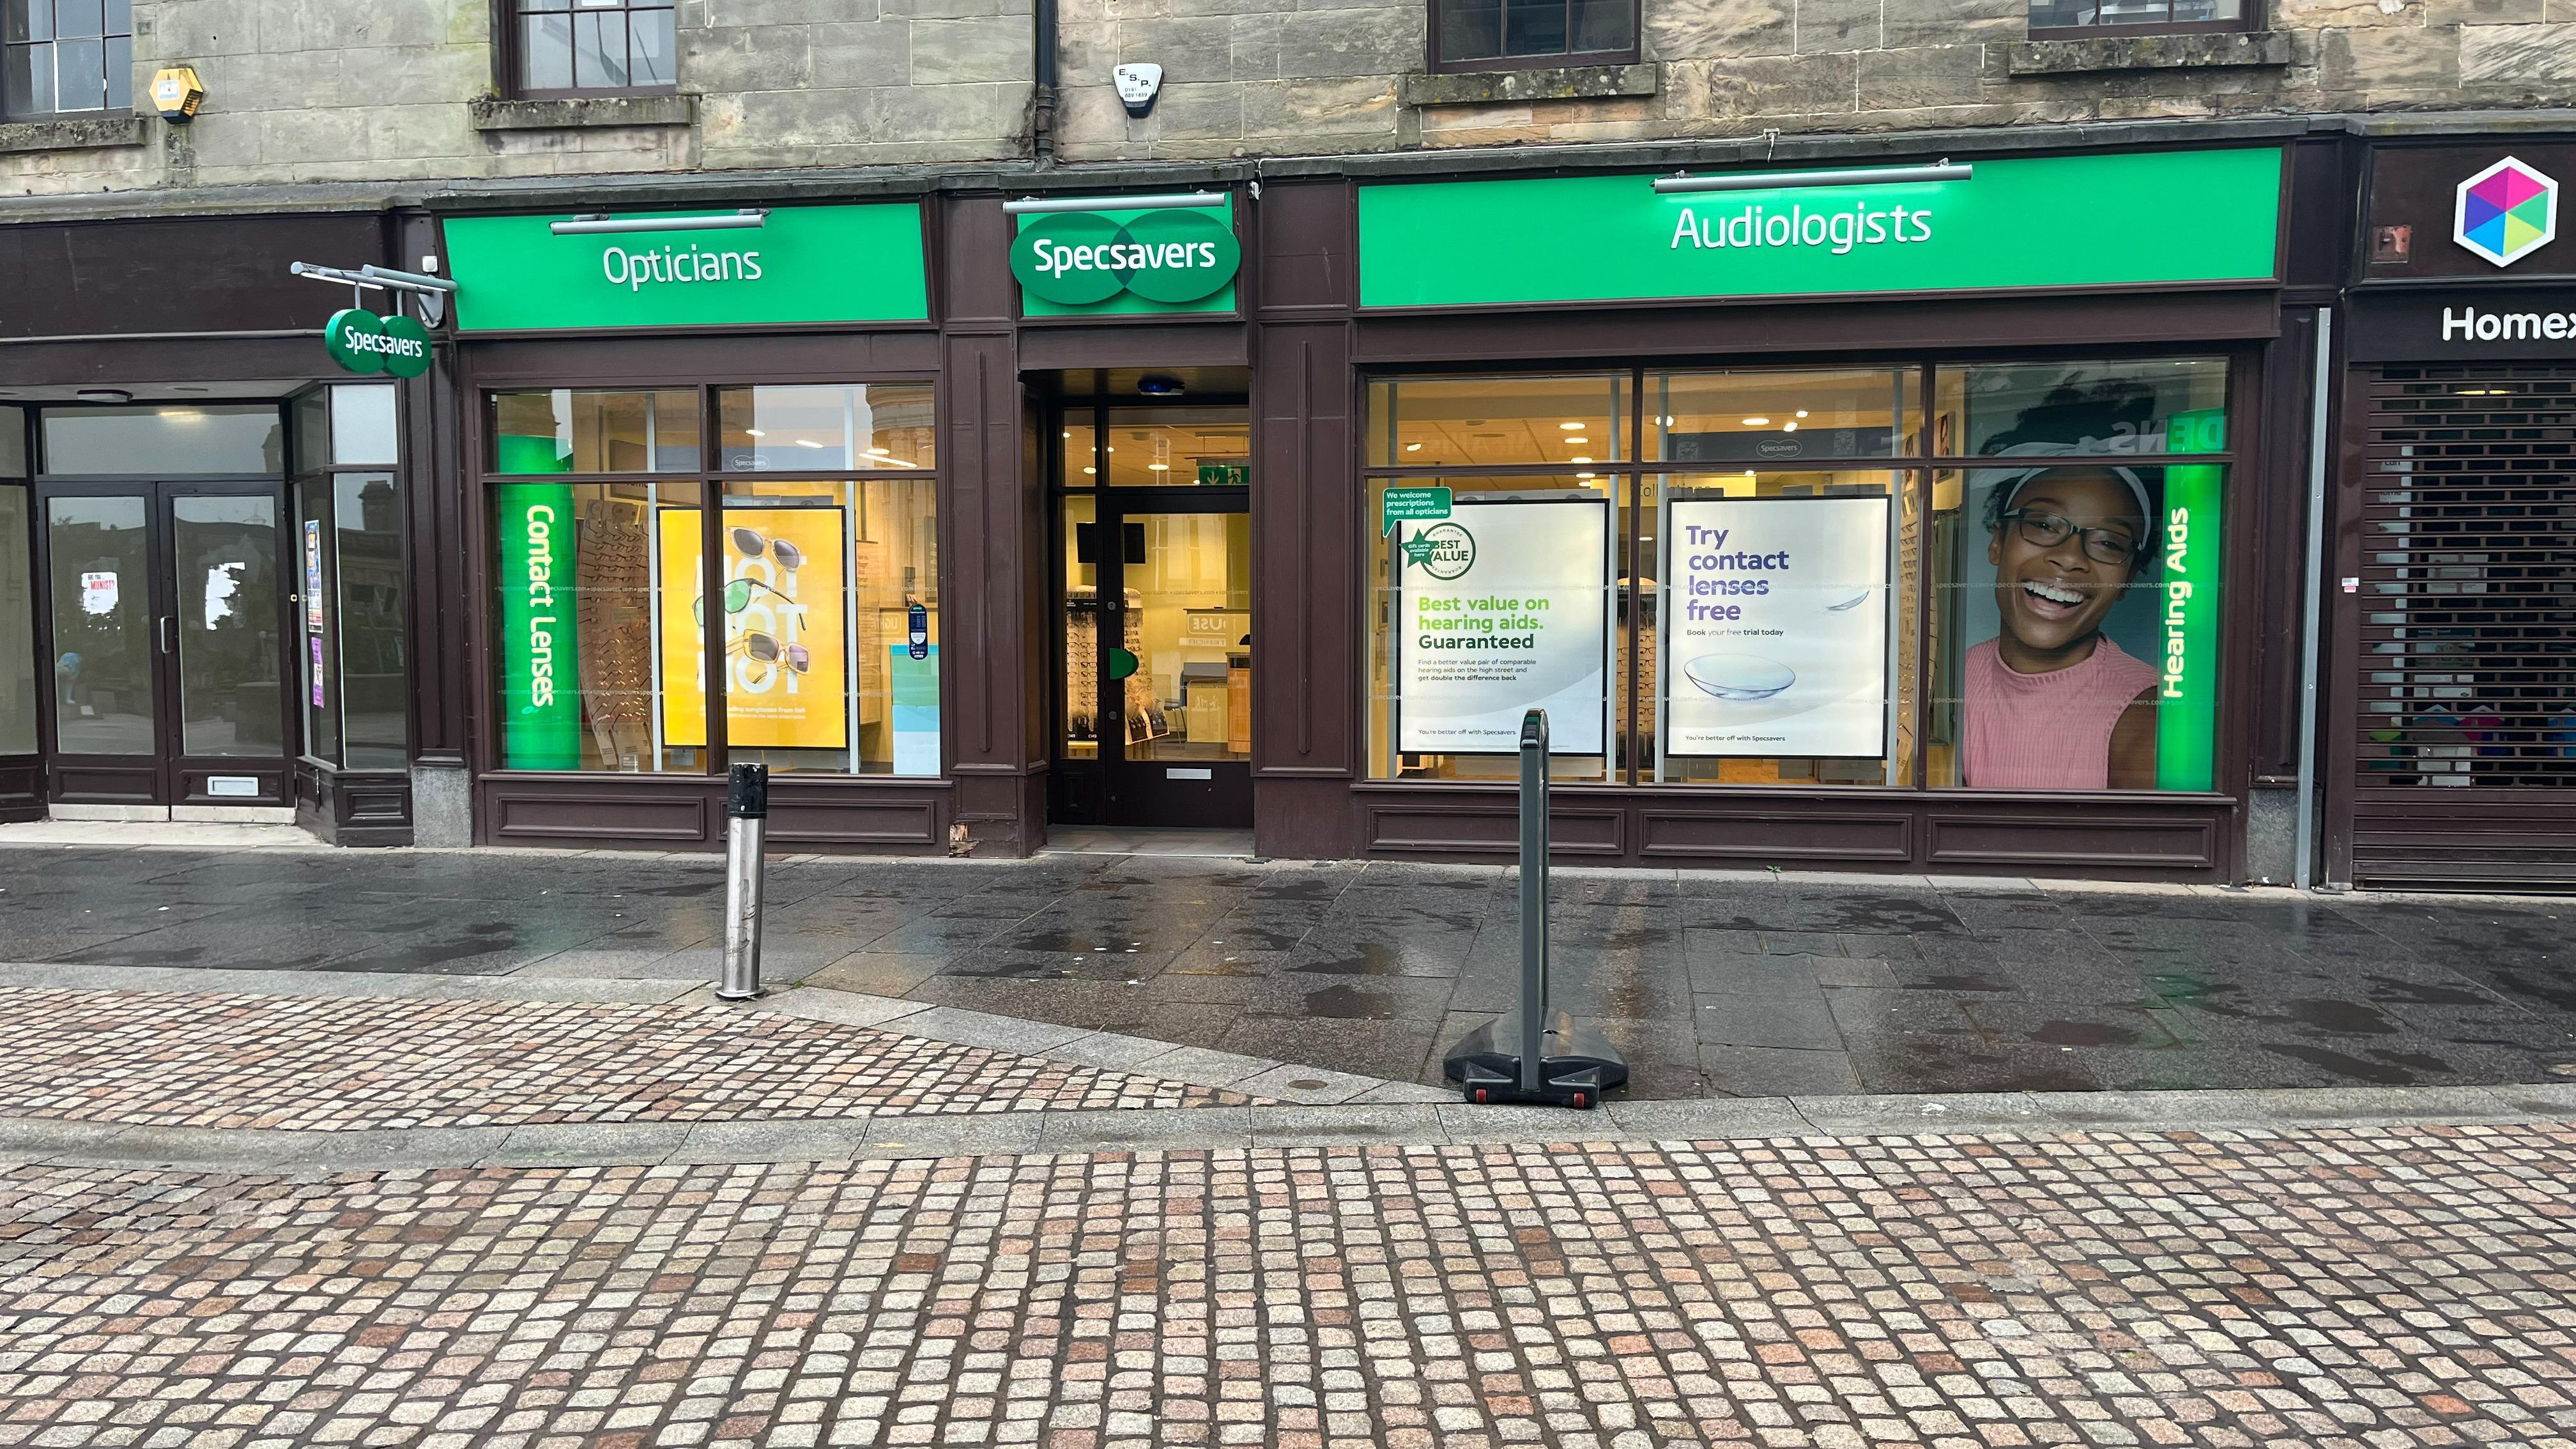 Images Specsavers Opticians and Audiologists - Paisley